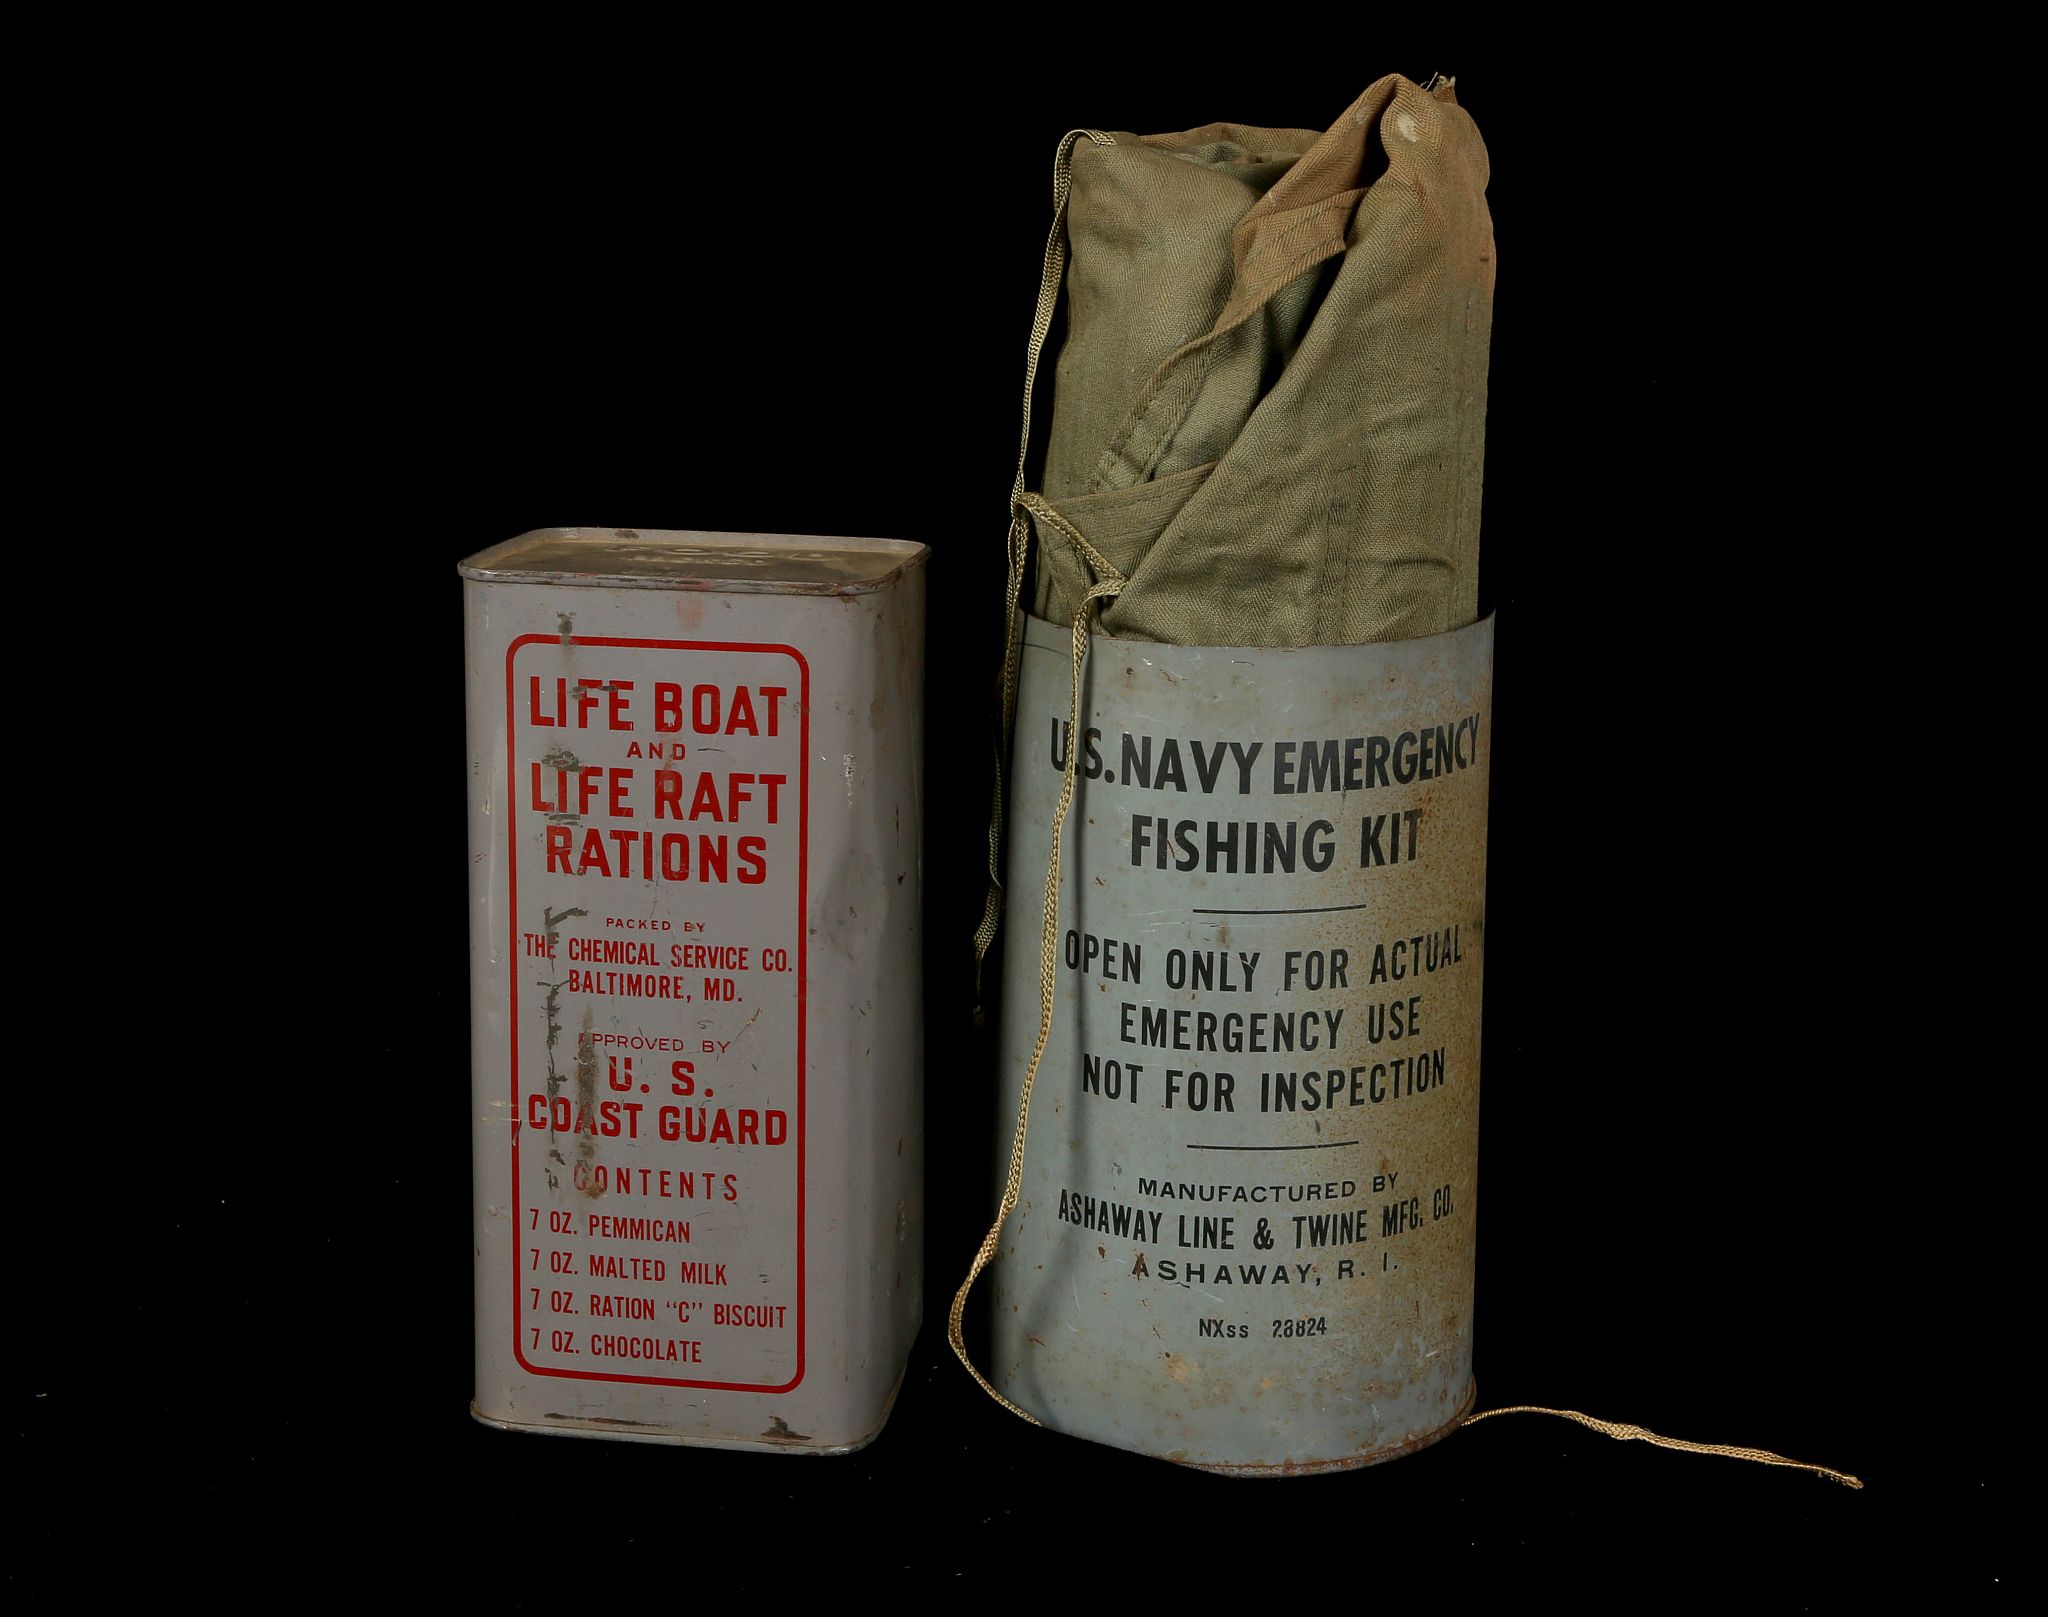 U.S. Forces Life Boat and Life Raft rations, 1945